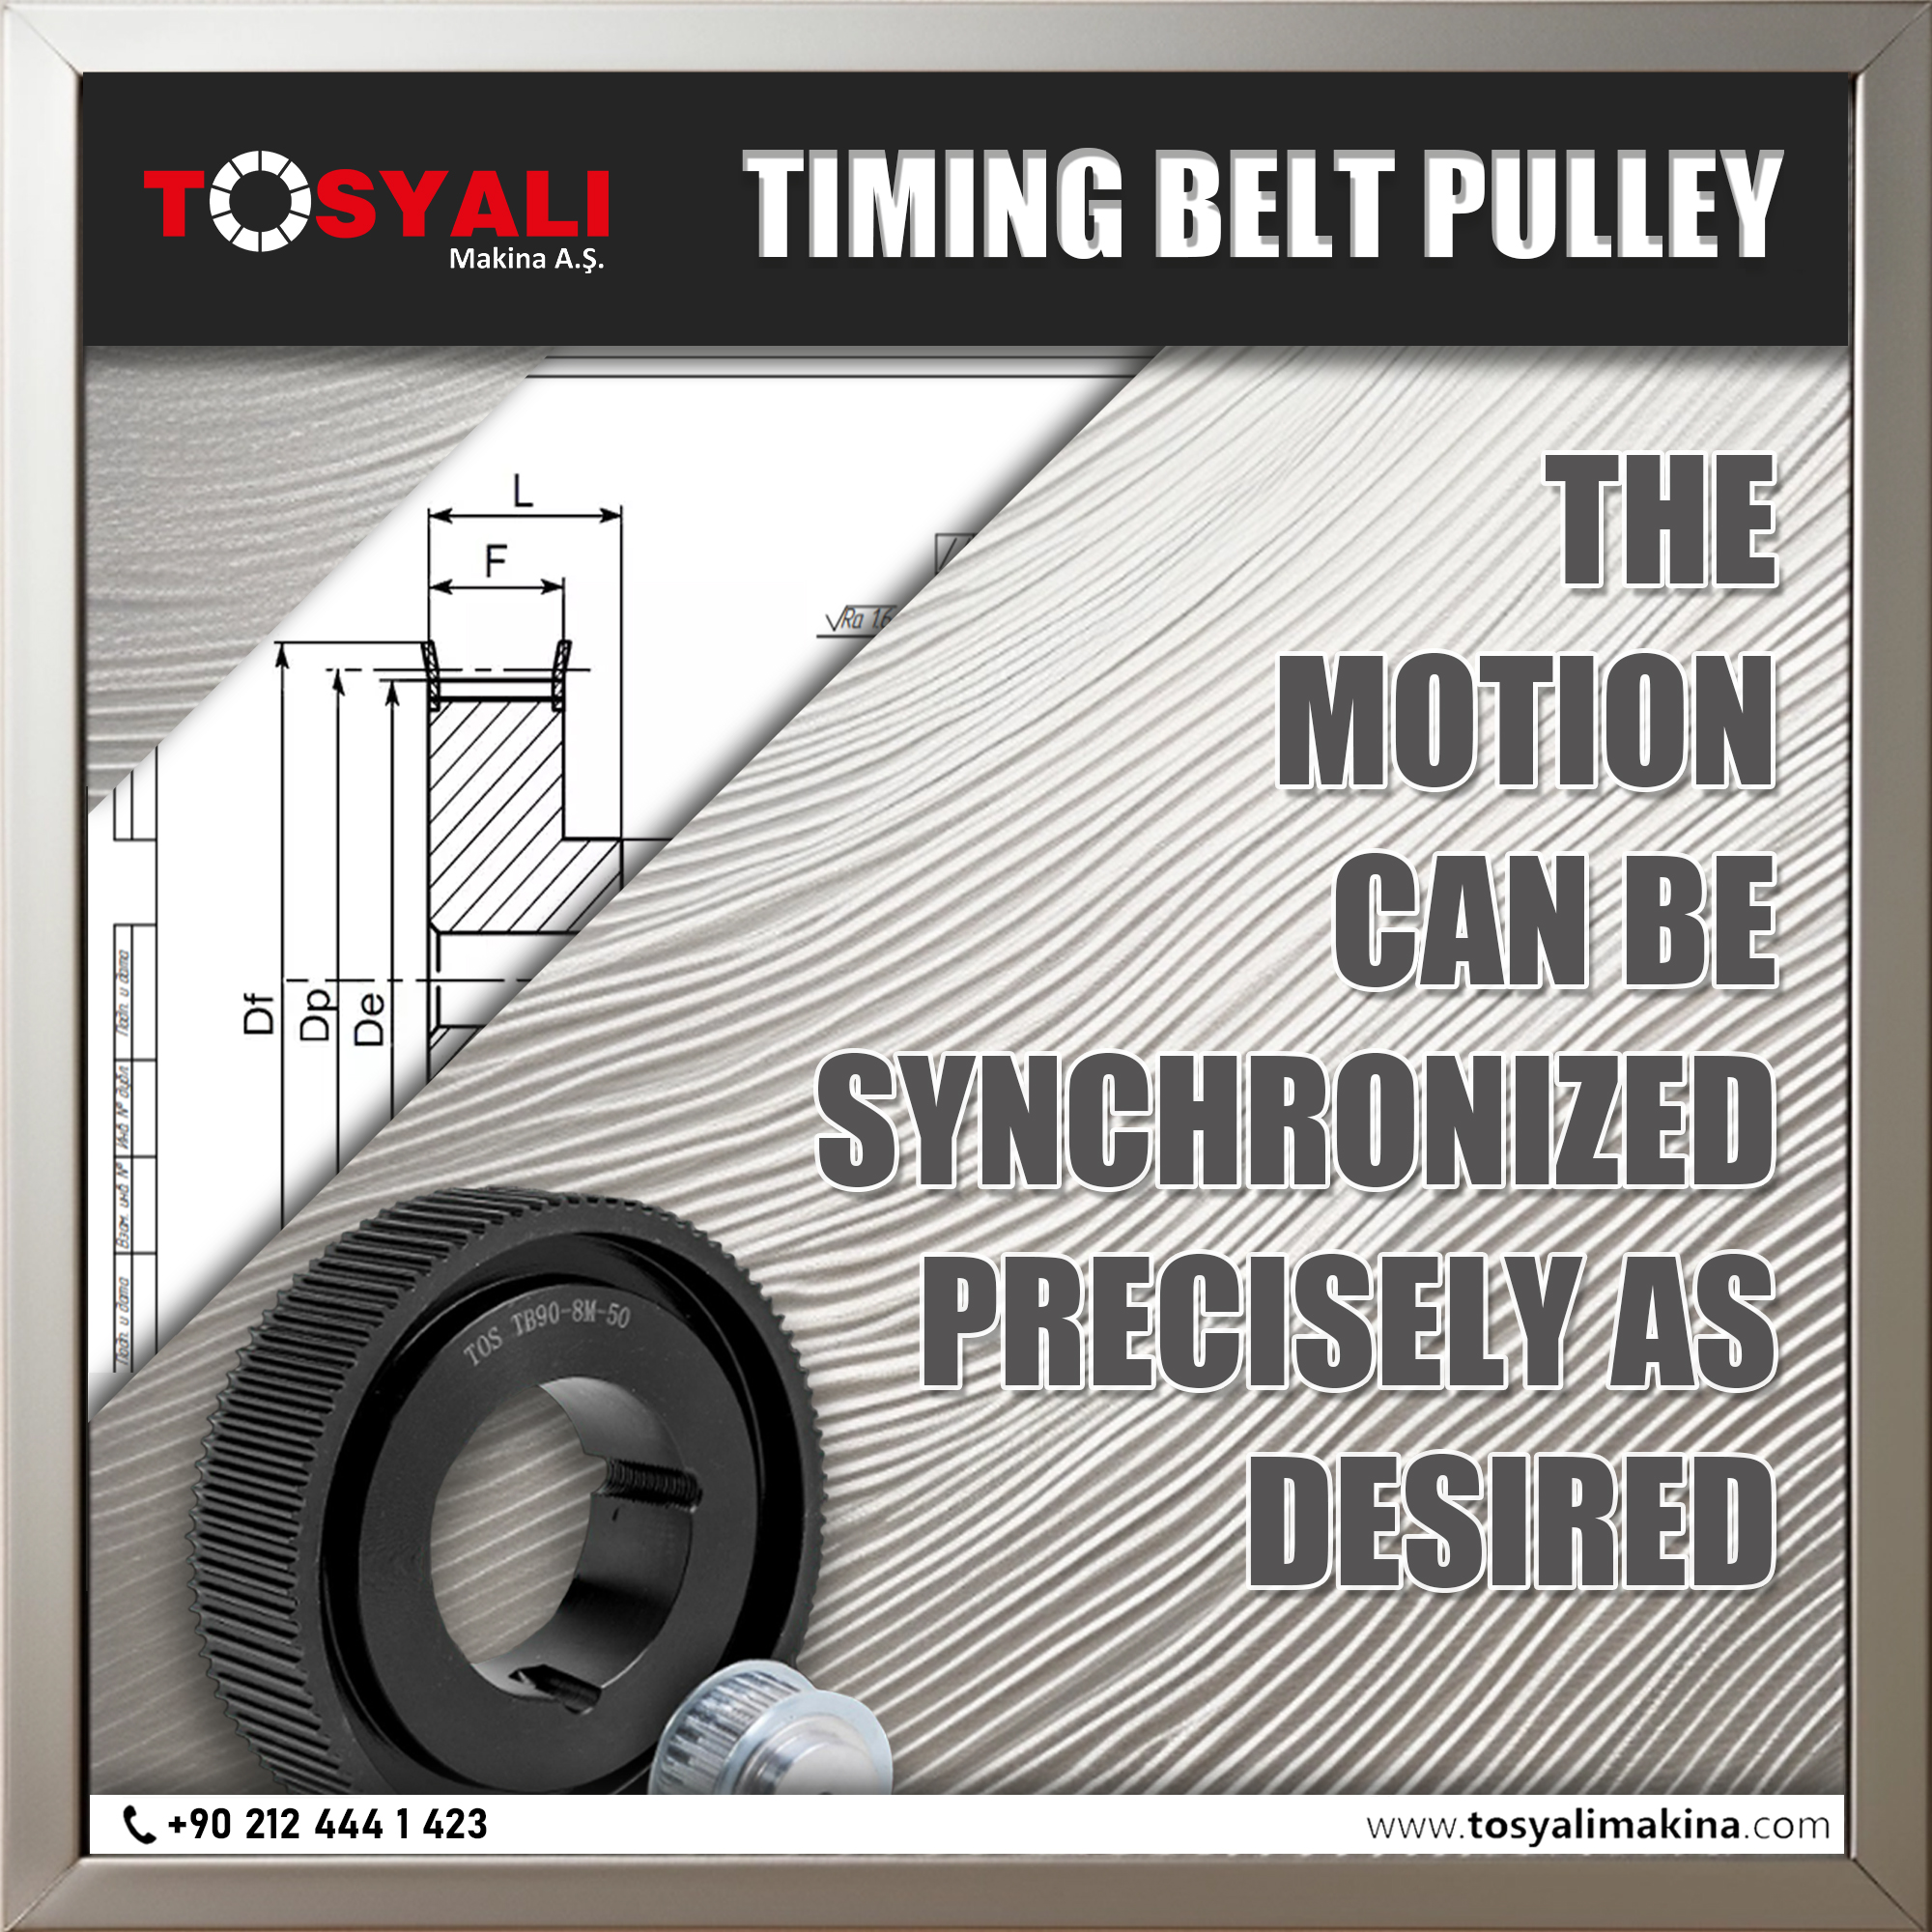 TIMING BELT PULLEY